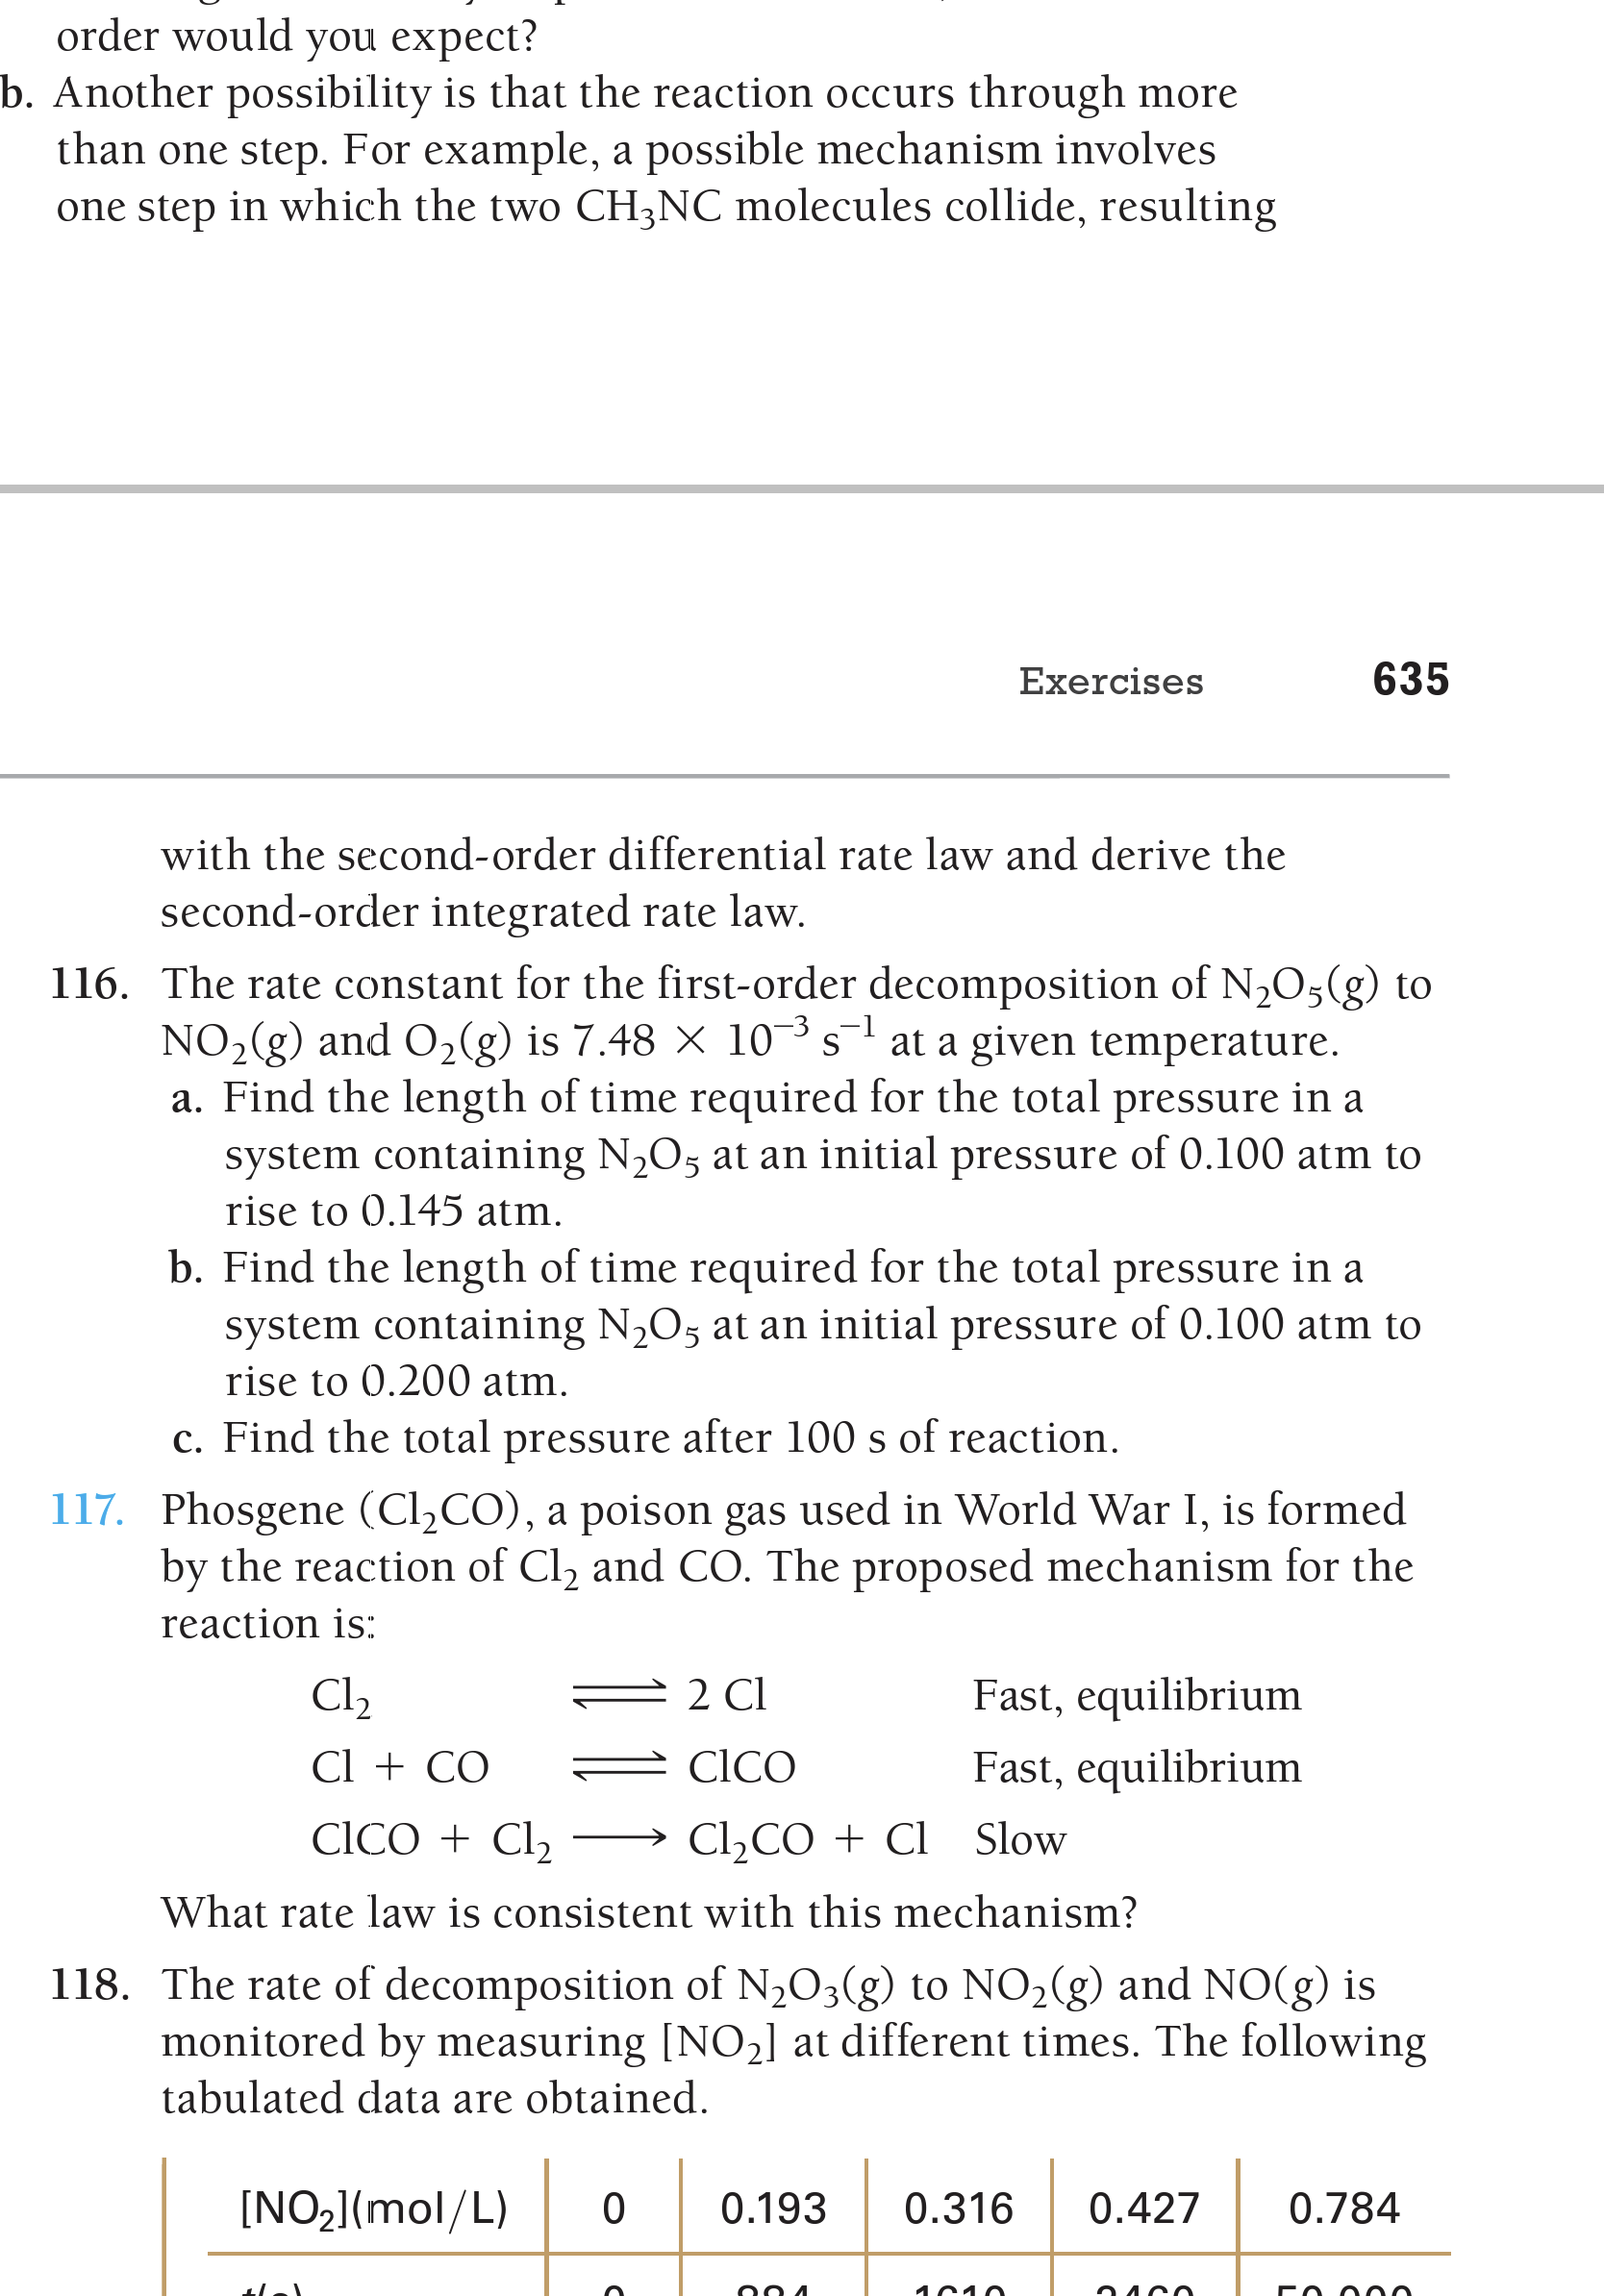 order would you expect?
b. Another possibility is that the reaction occurs through more
than one step. For example, a possible mechanism involves
one step in which the two CH3NC molecules collide, resulting
Exercises
635
with the second-order differential rate law and derive the
second-order integrated rate law.
116. The rate constant for the first-order decomposition of N,05(g) to
NO,(g) and O2lg) is 7.48 × 10³ s¯ at a given temperature.
a. Find the length of time required for the total pressure in a
system containing N,O5 at an initial pressure of 0.100 atm to
rise to 0.145 atm.
-3 -1
b. Find the length of time required for the total pressure in a
system containing N2O5 at an initial pressure of 0.100 atm to
rise to 0.200 atm.
c. Find the total pressure after 100 s of reaction.
117. Phosgene (CI2CO), a poison gas used in World War I, is formed
by the reaction of Cl, and CO. The proposed mechanism for the
reaction is:
Cl2
2 Cl
Fast, equilibrium
Cl + CO
CICO
Fast, equilibrium
CICO + Cl2
Cl2CO + Cl Slow
What rate law is consistent with this mechanism?
118. The rate of decomposition of N,O3(g) to NO2(g) and NO(g) is
monitored by measuring [NO2] at different times. The following
tabulated data are obtained.
[NO2](mol/L)
0.193
0.316
0.427
0.784
